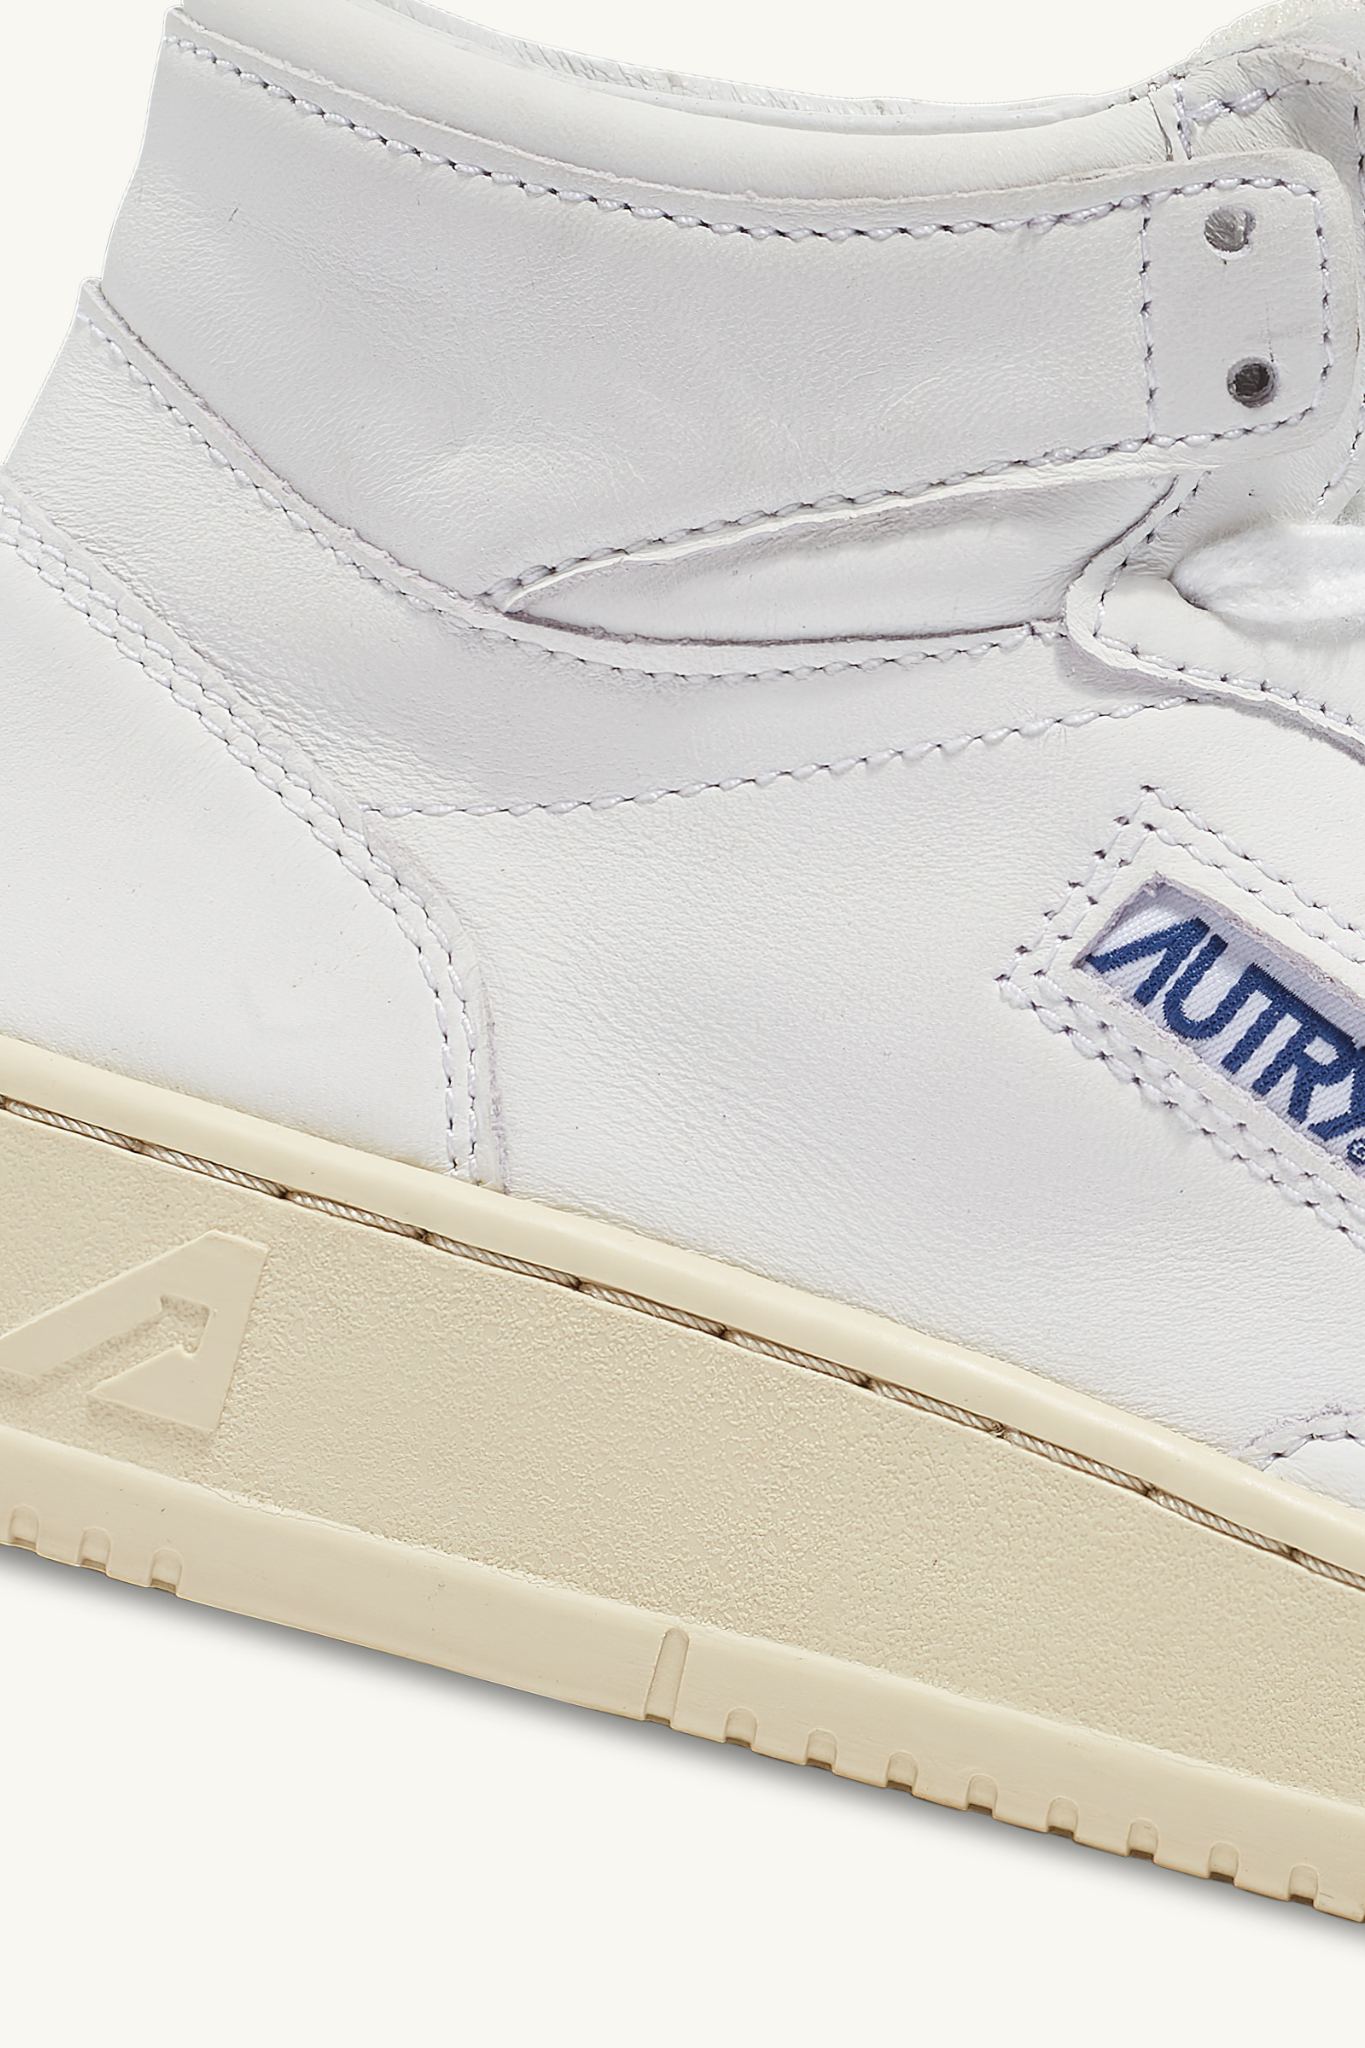 AUMW-GG04 - MEDALIST MID SNEAKERS IN SOFT GOATSKIN COLOR WHITE